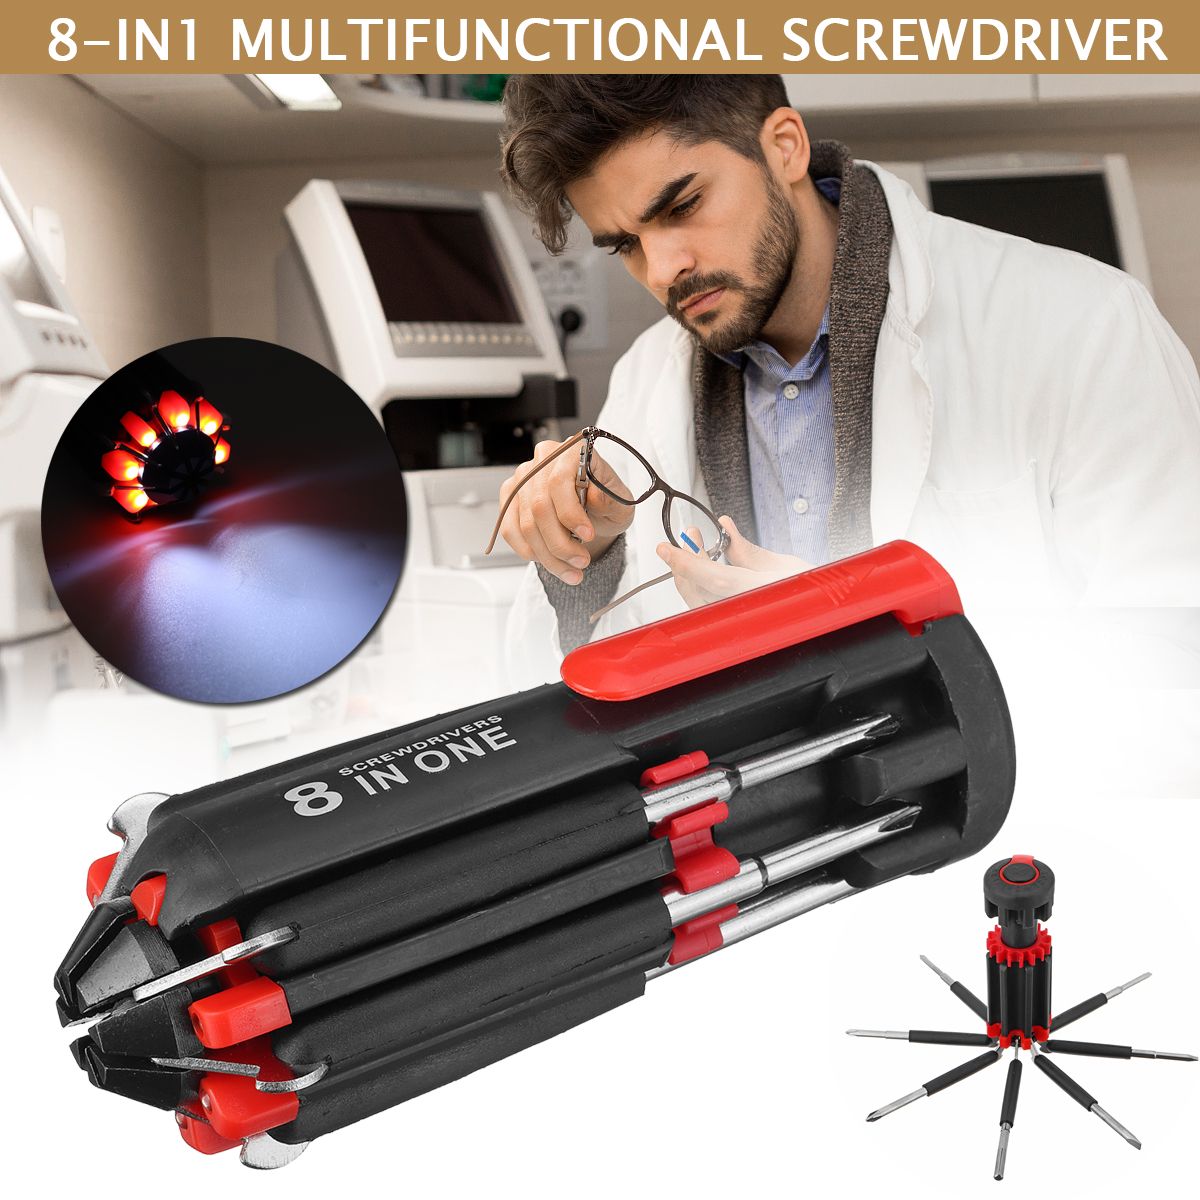 8-in-1-Multifunctional-Screwdriver-Cellphones-Watches-Home-Appliances-Repair-Tools-with-Light-1667233